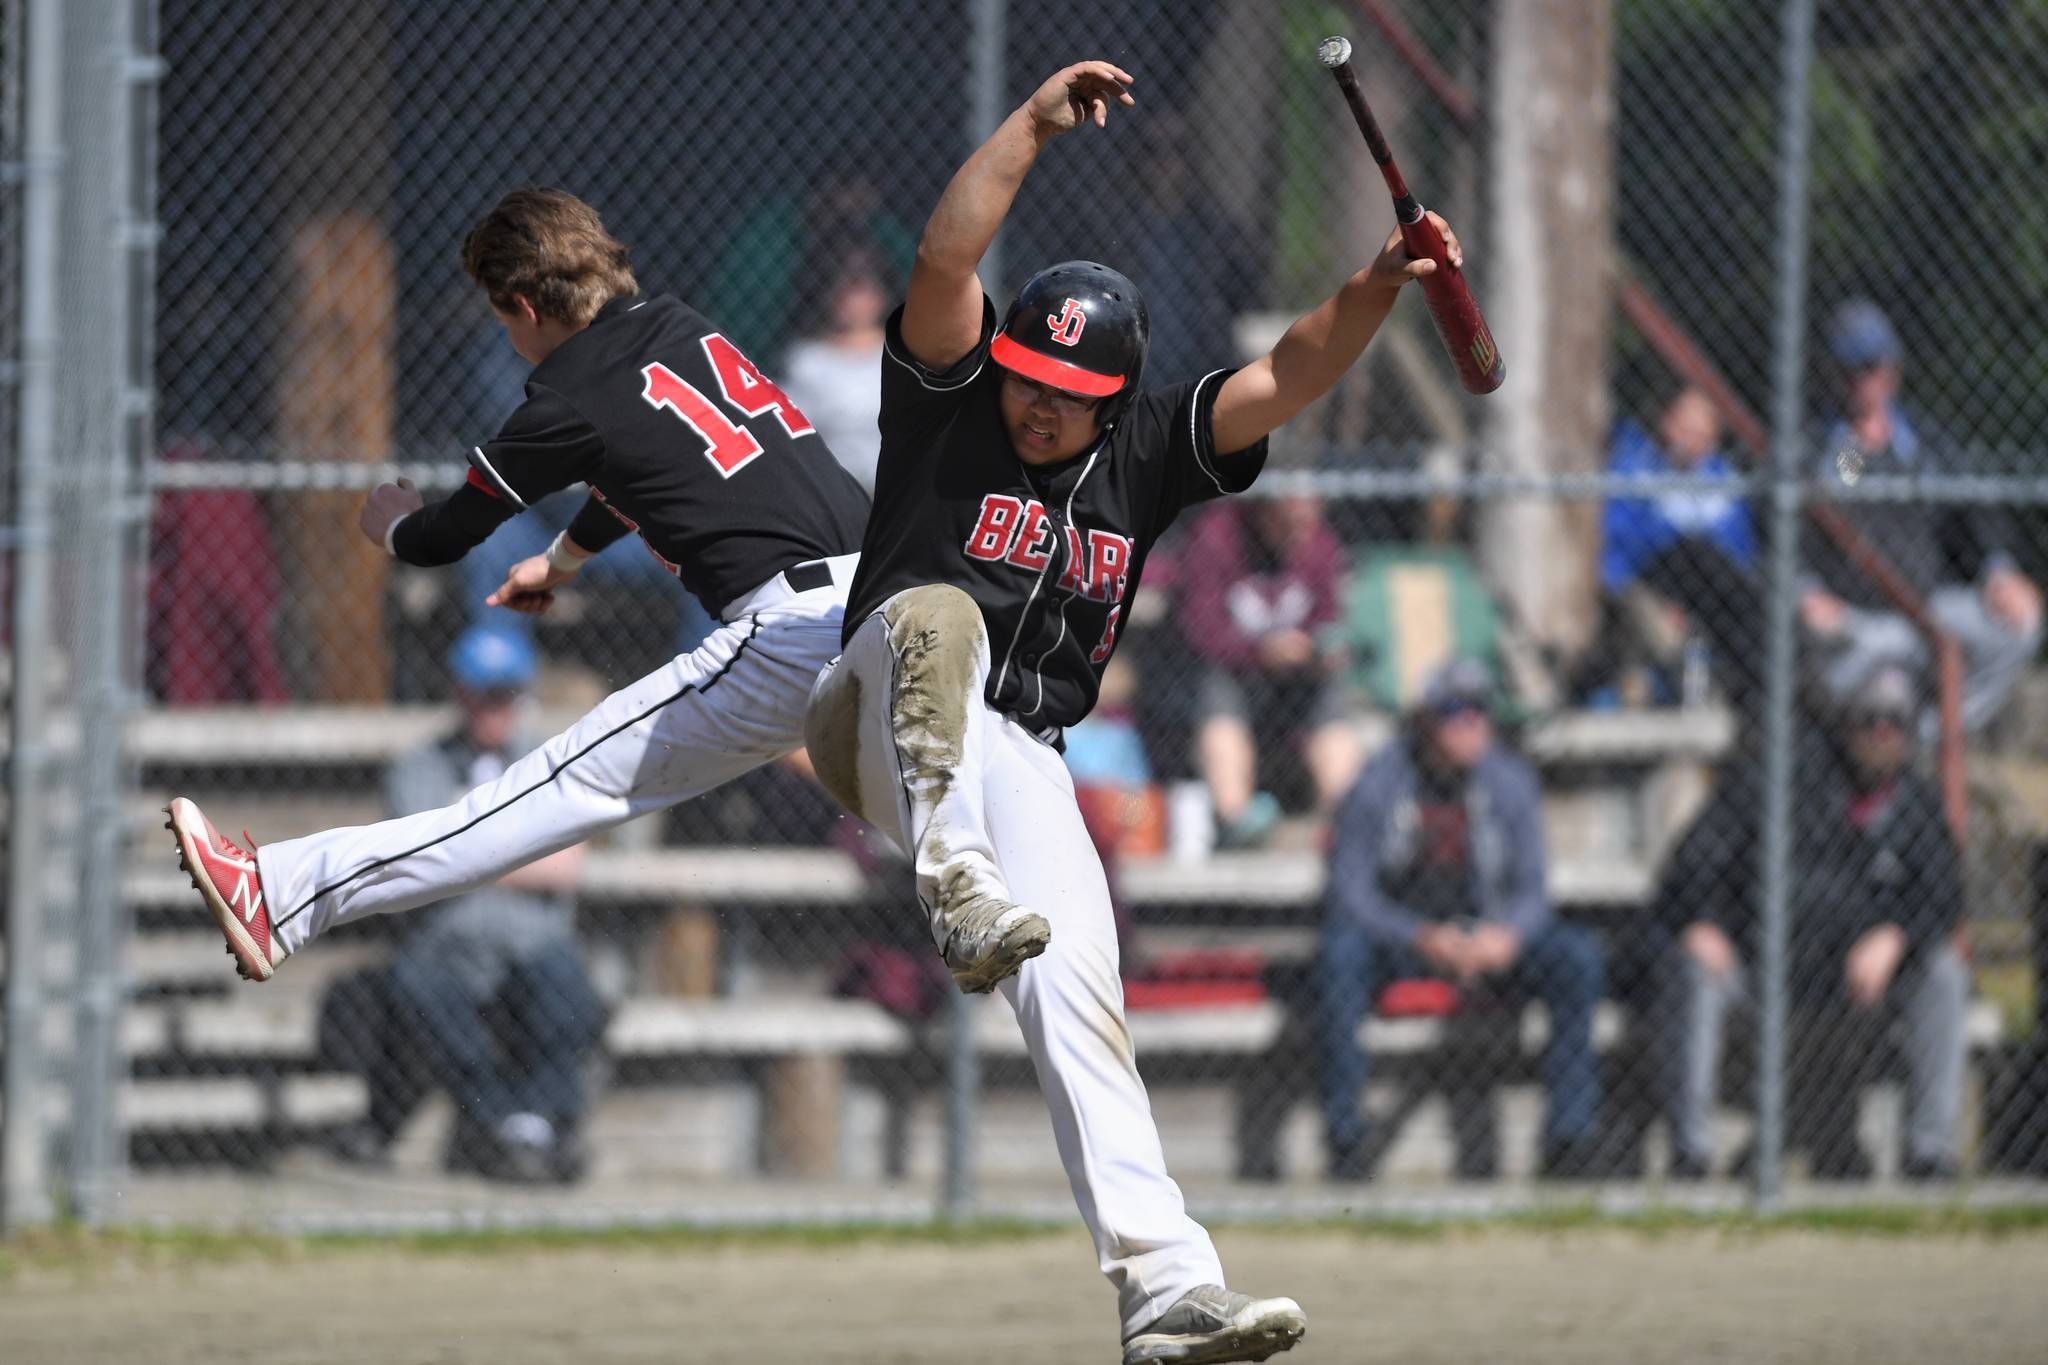 Juneau-Douglas’ Kona Ogoy, right, celebrates with teammate Austin McCurley after scoring the go-ahead run in the seventh inning against Ketchikan during the Region V Baseball Championship at Adair-Kennedy Memorial Park on Friday, May 24, 2019. (Michael Penn | Juneau Empire File)